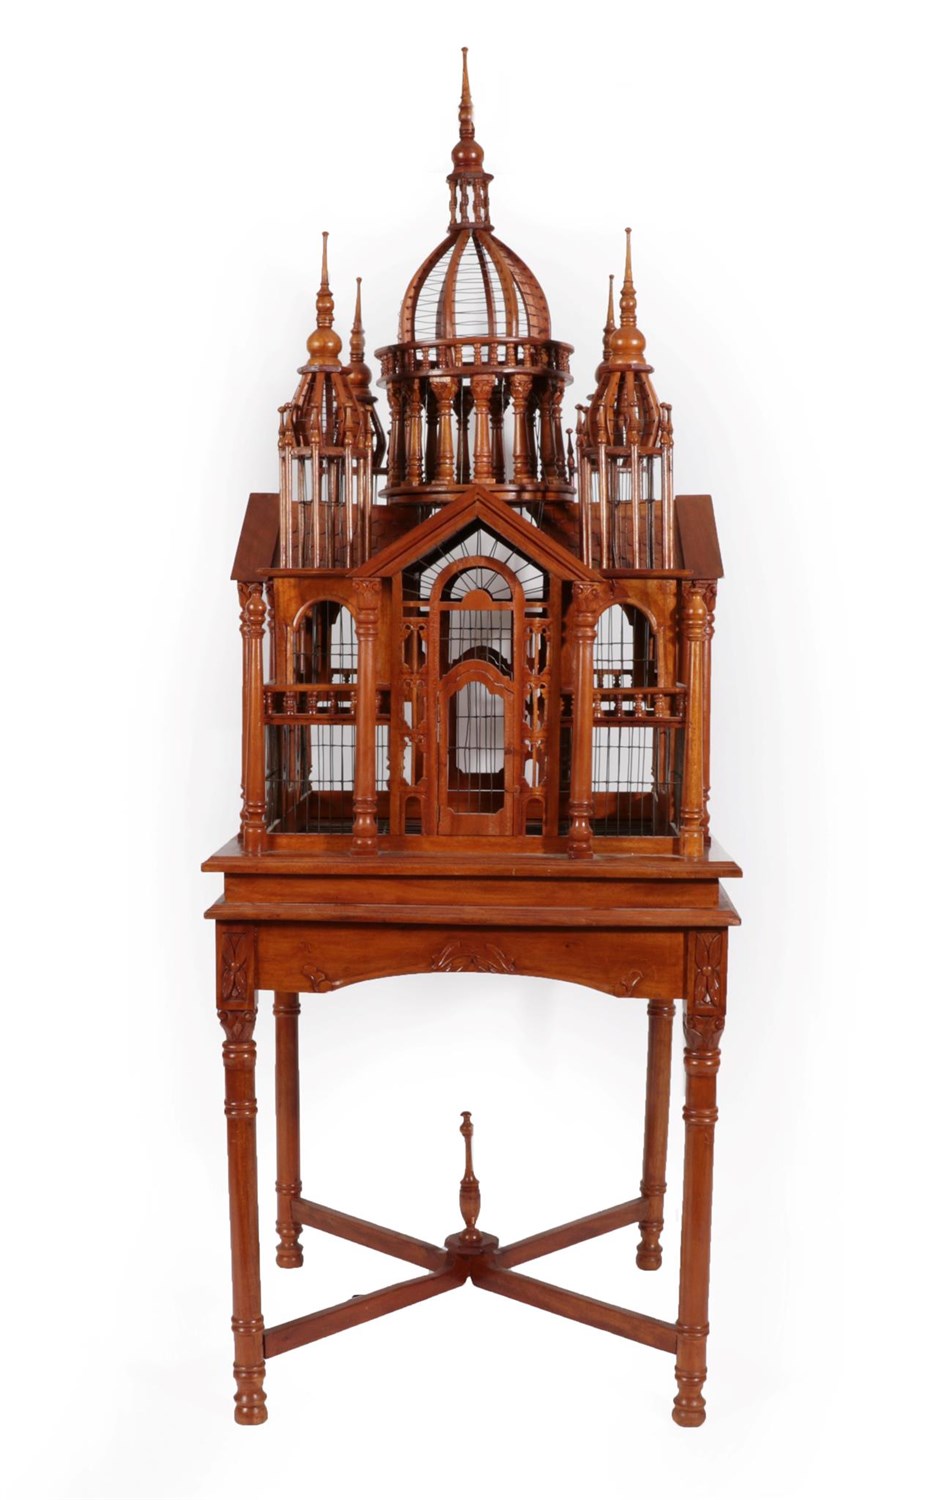 Lot 78 - A Hardwood Bird Cage, probably Indian, mid 20th century, with central dome flanked by four minarets